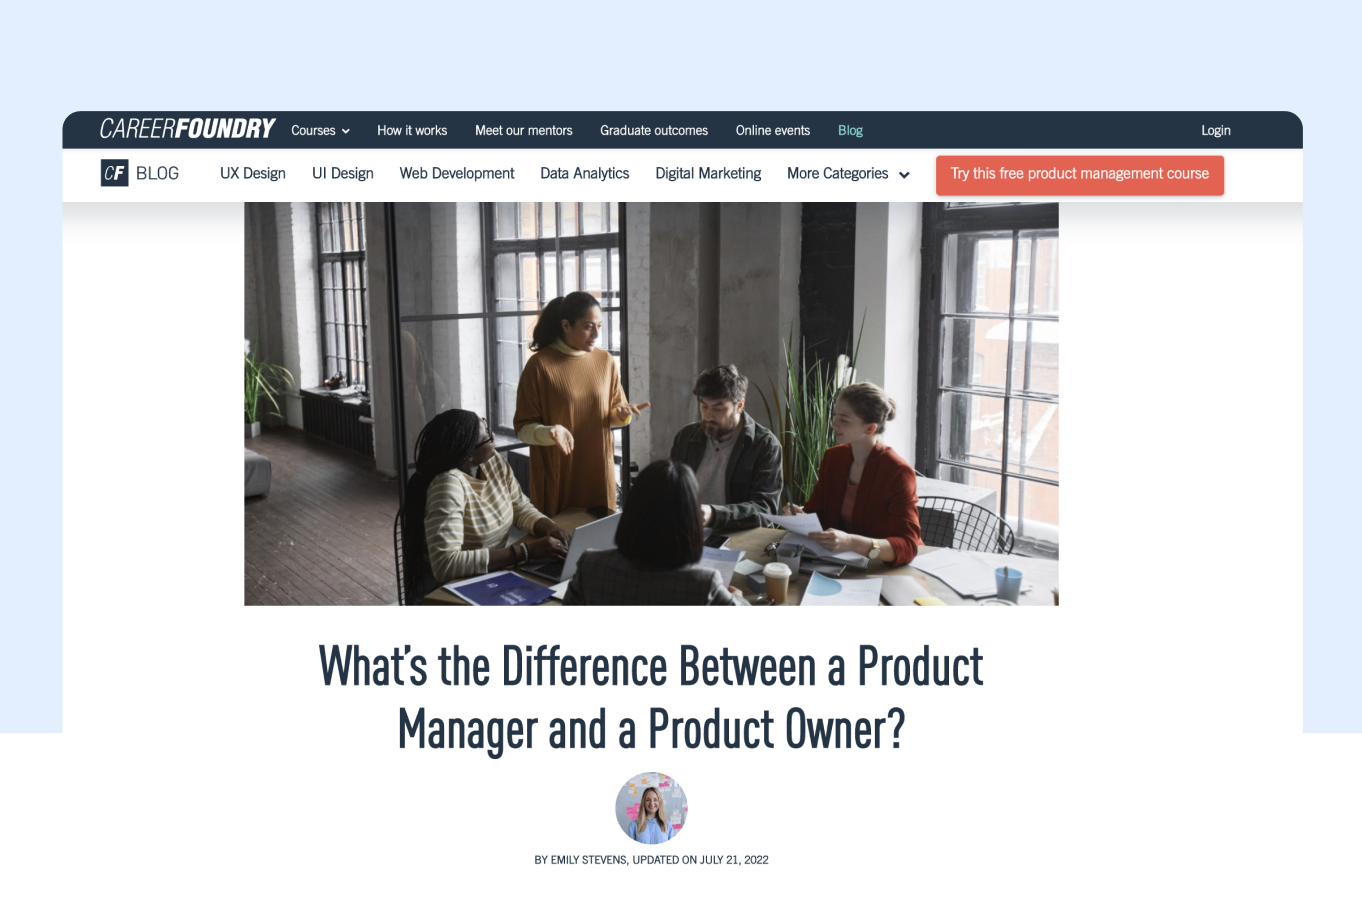 What's the difference between a product manager and a product owner?